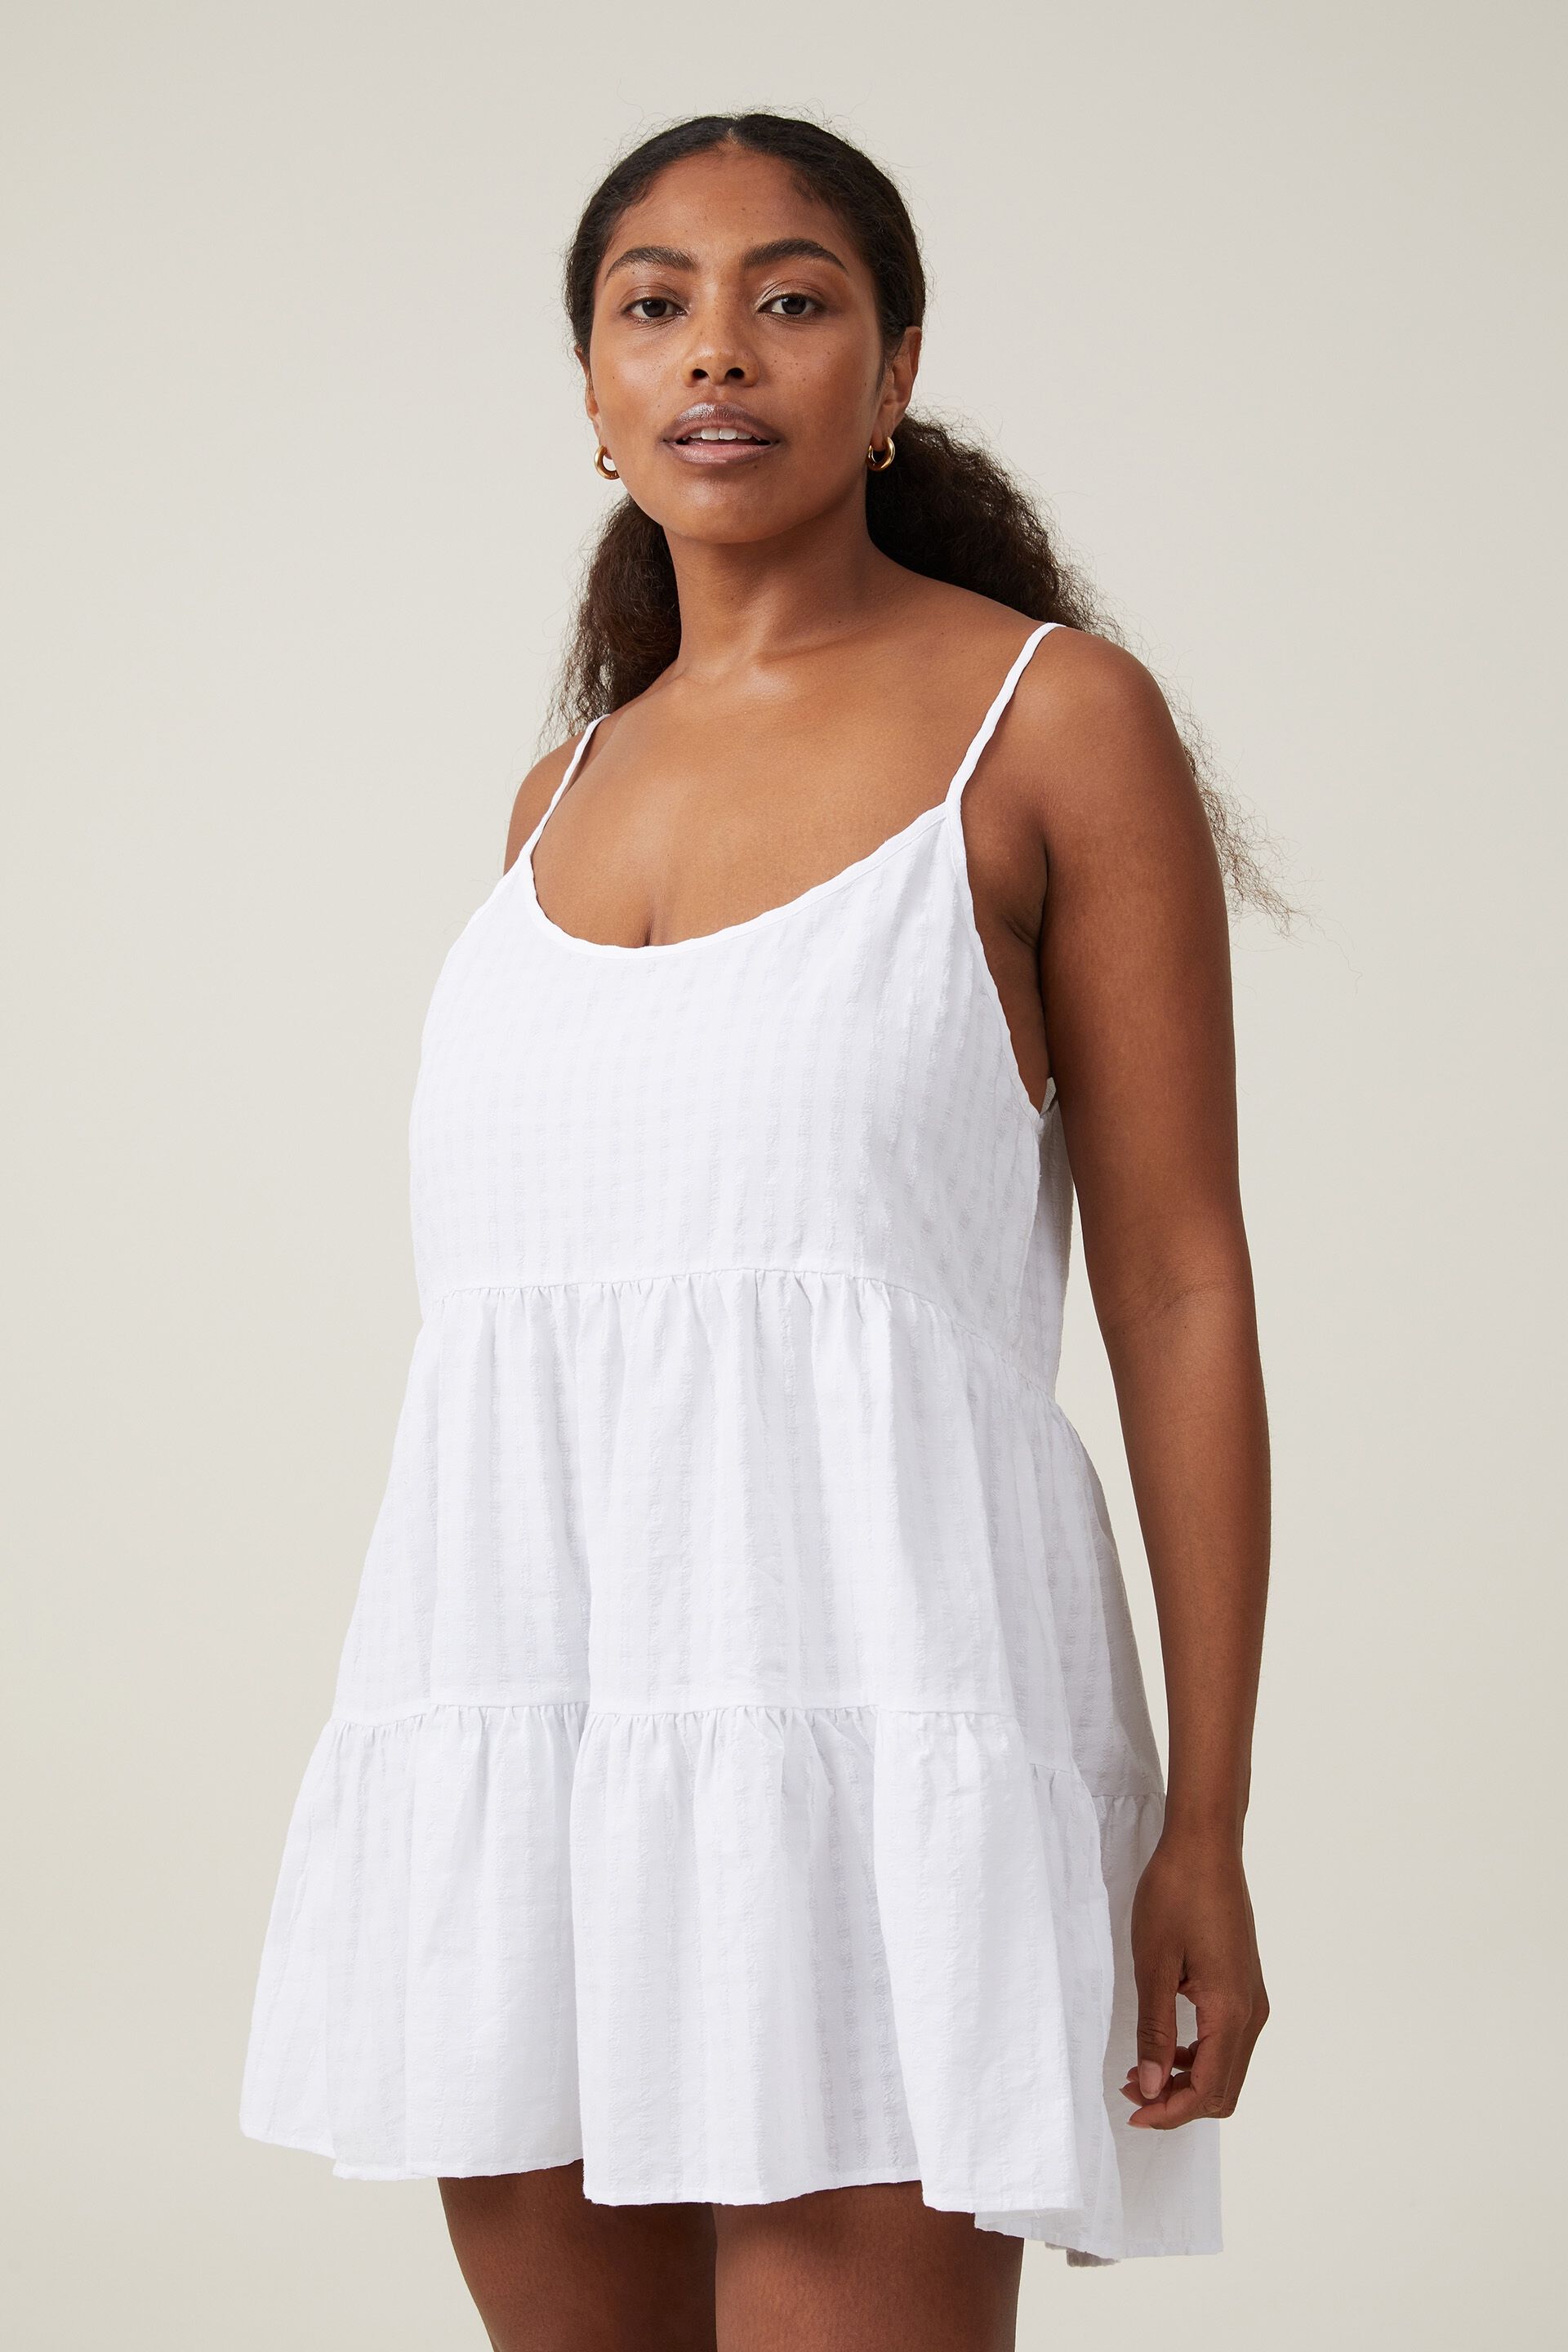 White Organic Cotton Dress Lace Up High Waist Ruffle Mini Dress With A Line  Frills For Women Perfect For Summer Holidays And Casual Wear Vestido 220418  From Jiao02, $19.34 | DHgate.Com